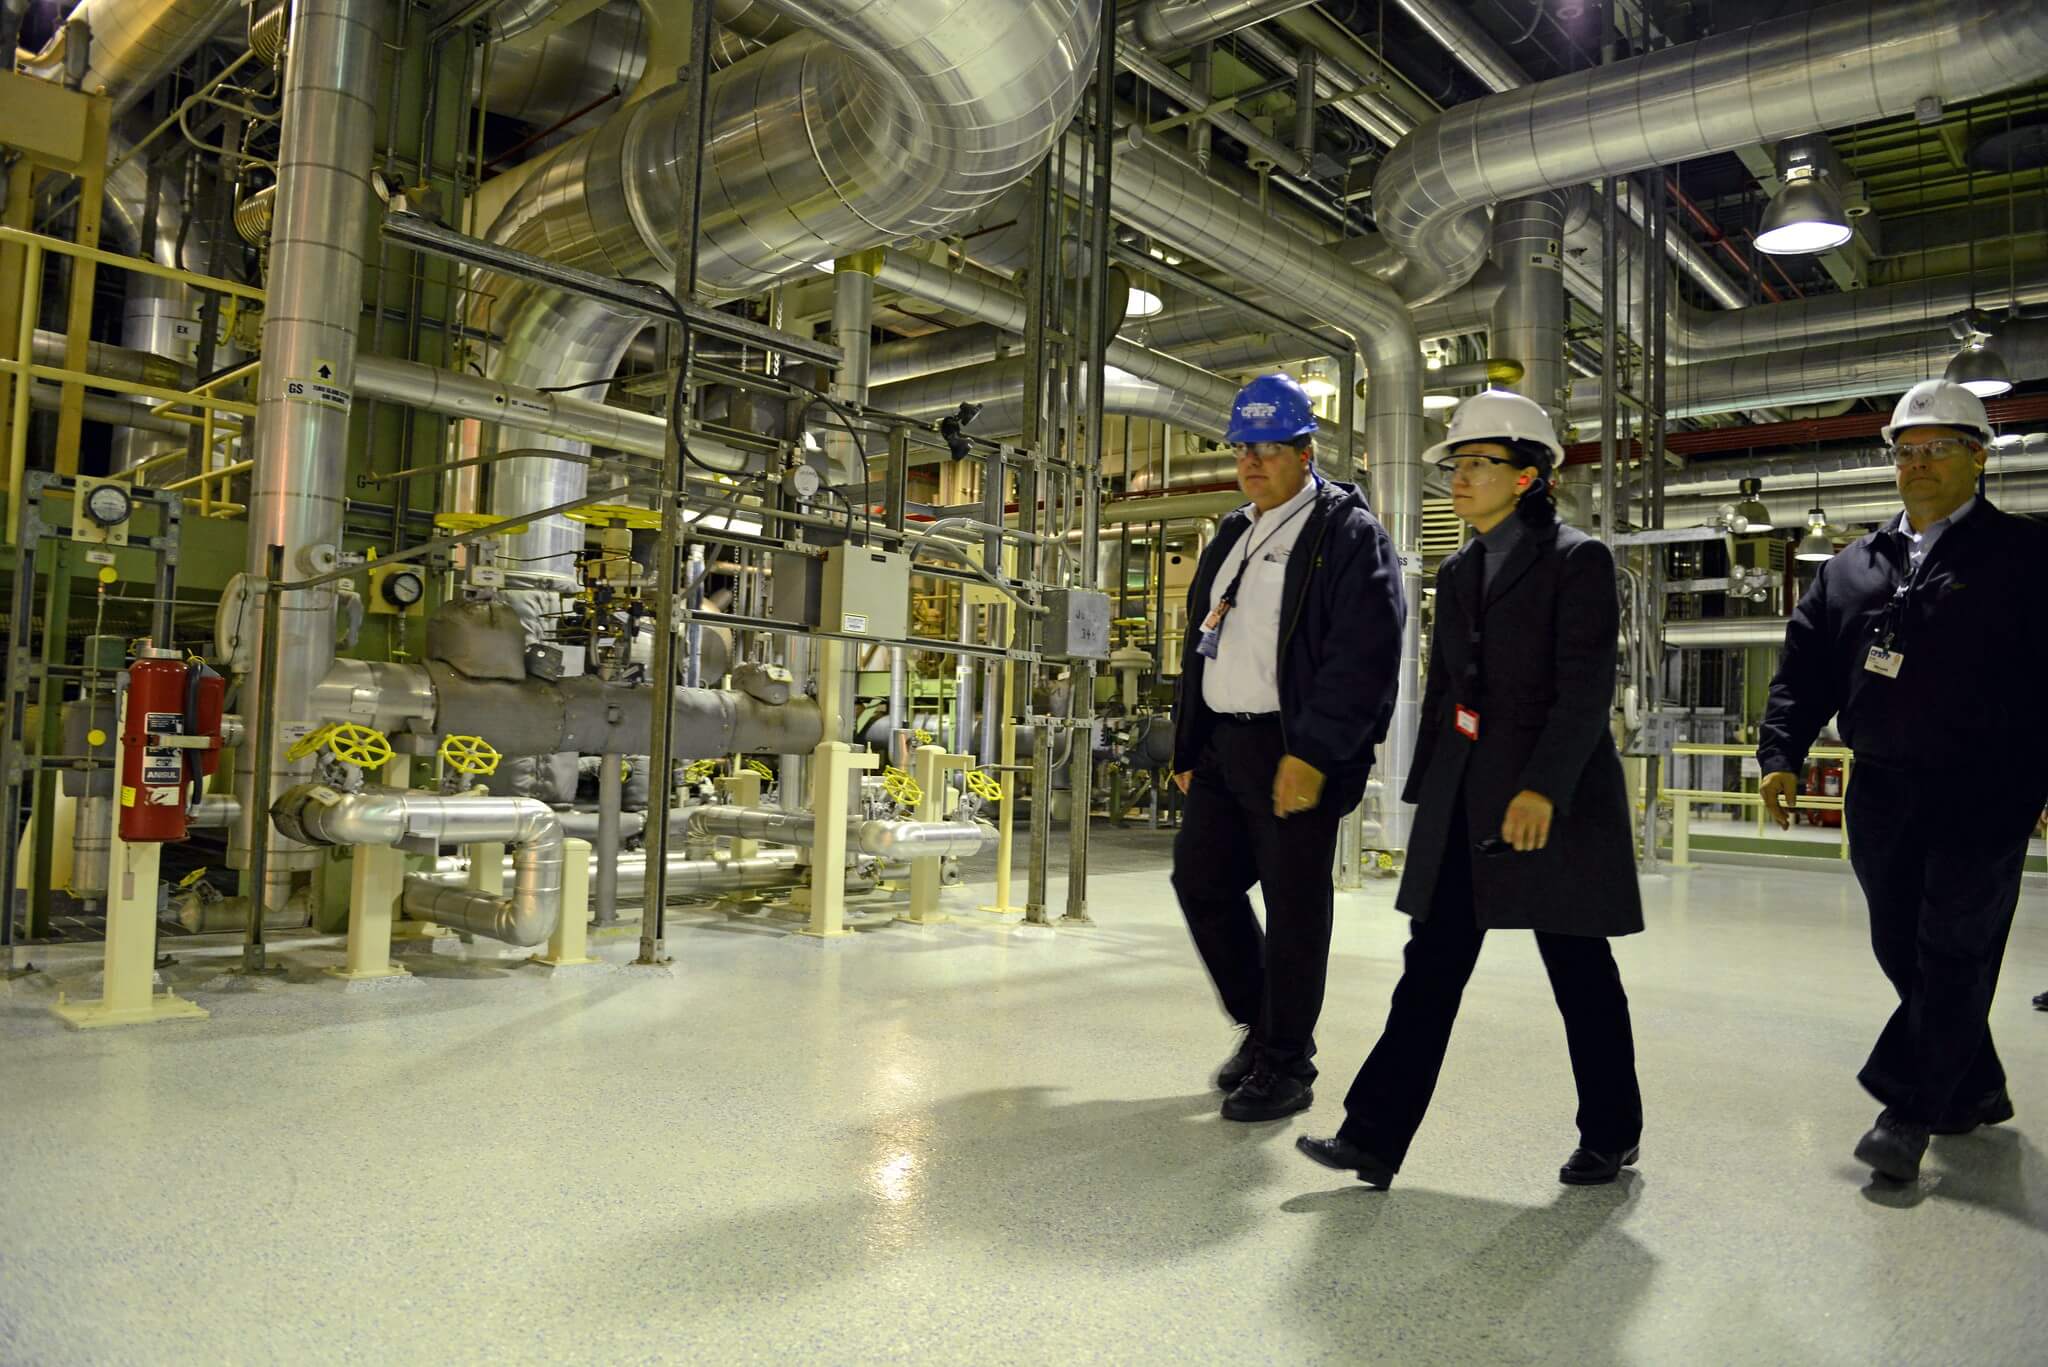 Inspection at the Comanche Peak nuclear power plant near Glen Rose, 2013. © Nuclear Regulatory Commission / Flickr